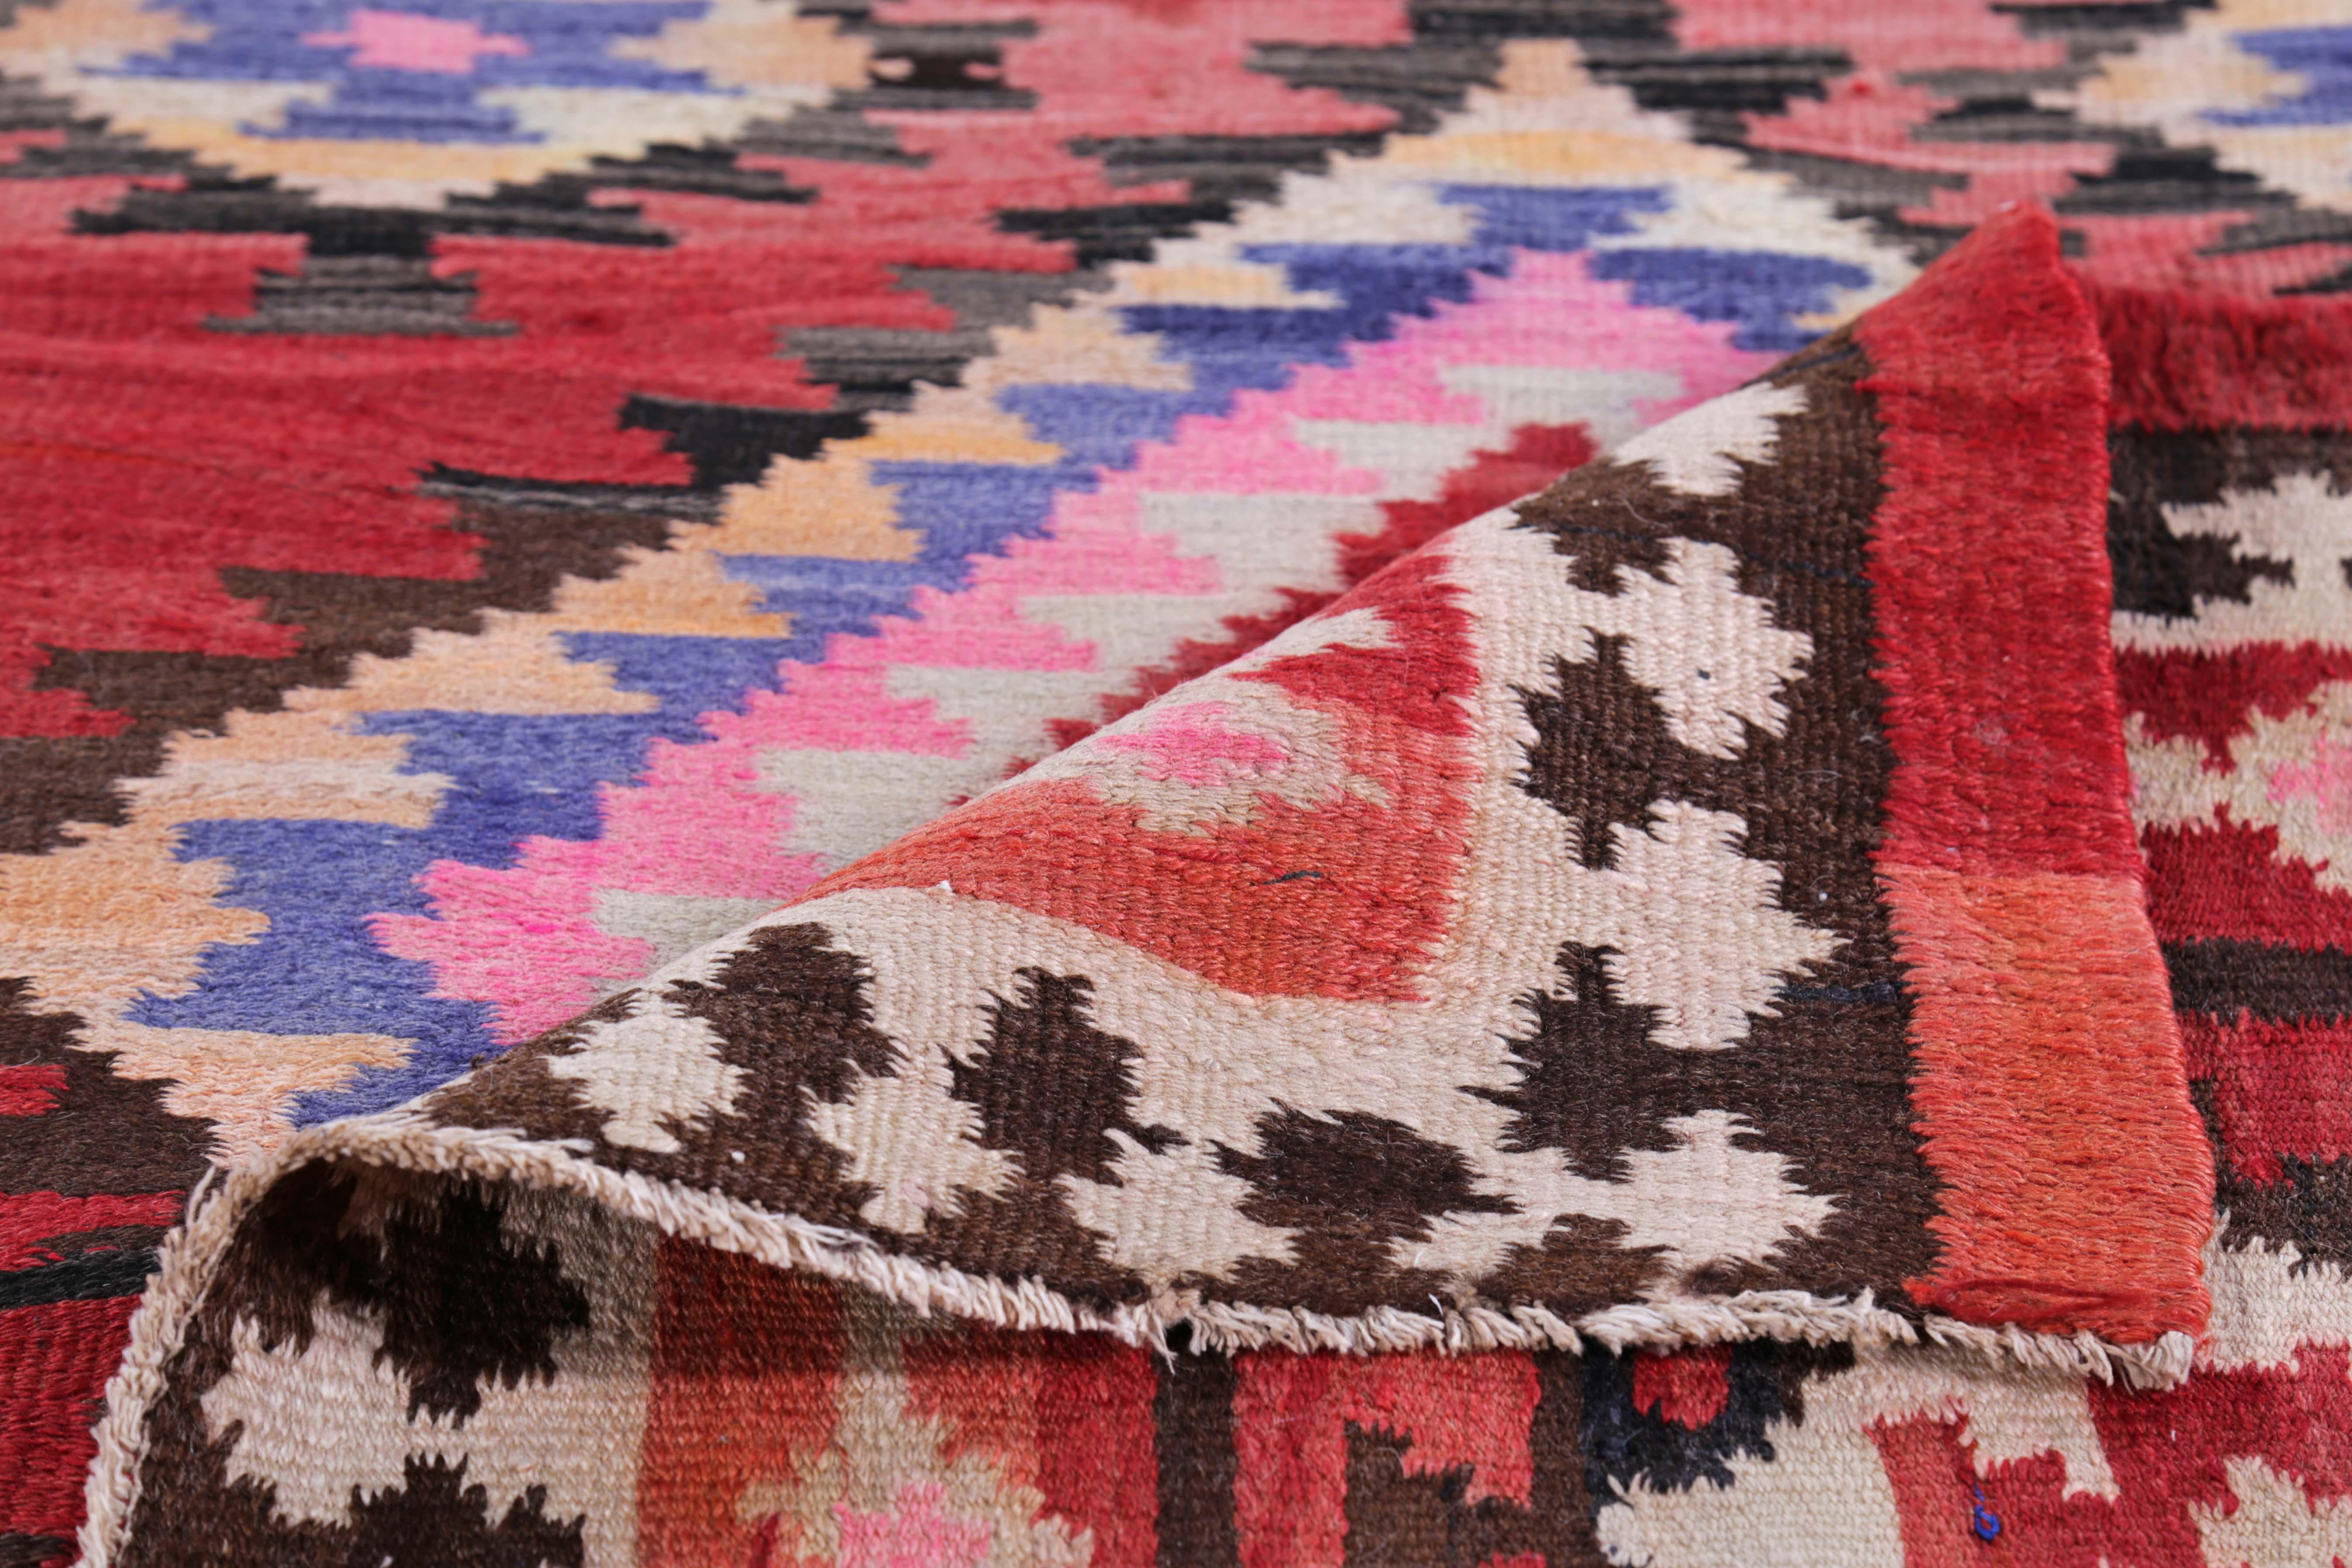 Hand-Woven Turkish Kilim Runner Rug with Red, Pink and White Diamond Pattern For Sale